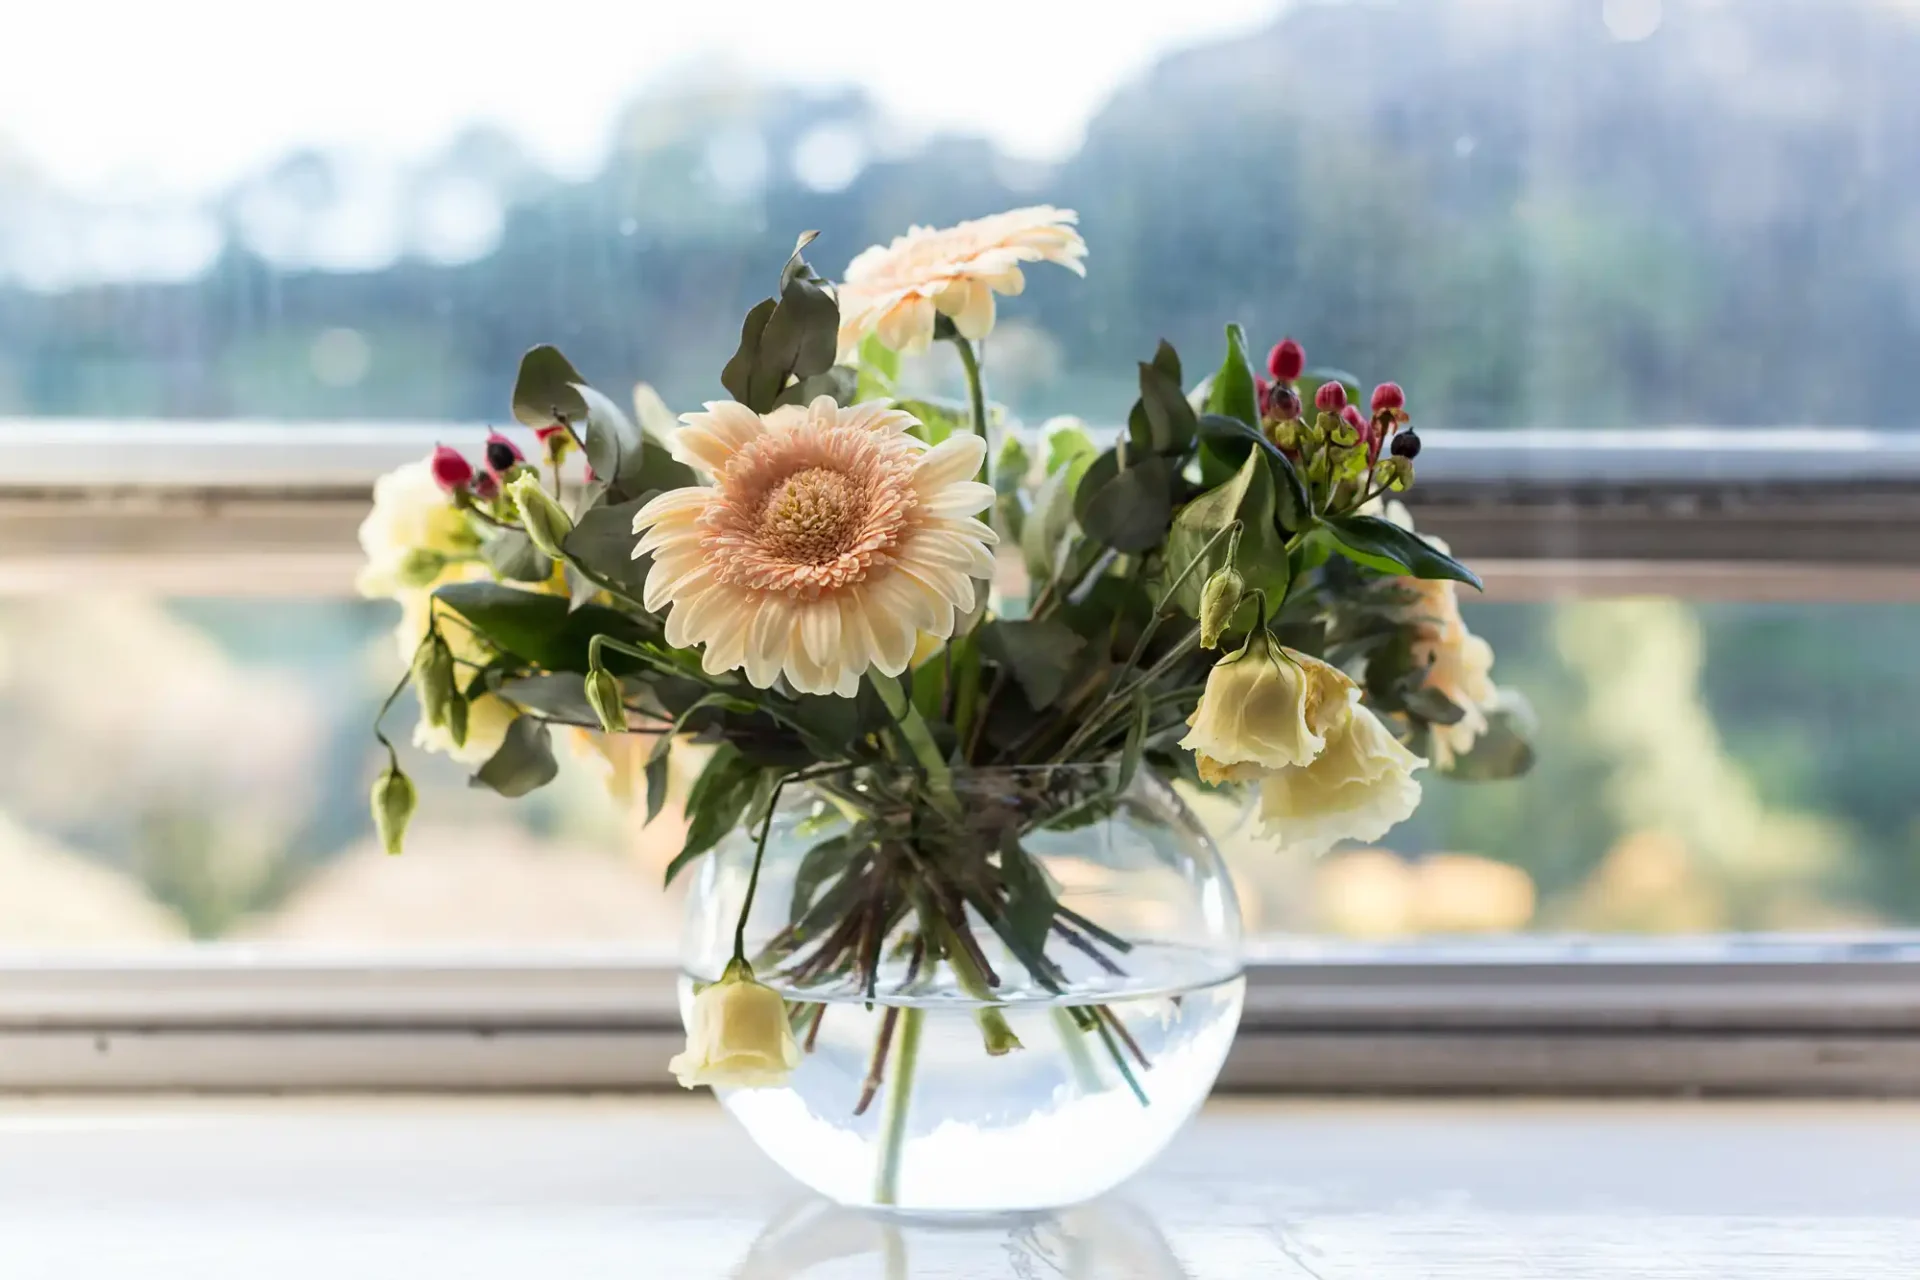 A bouquet of fresh flowers in a glass vase on a windowsill with a rainy landscape visible through the glass.